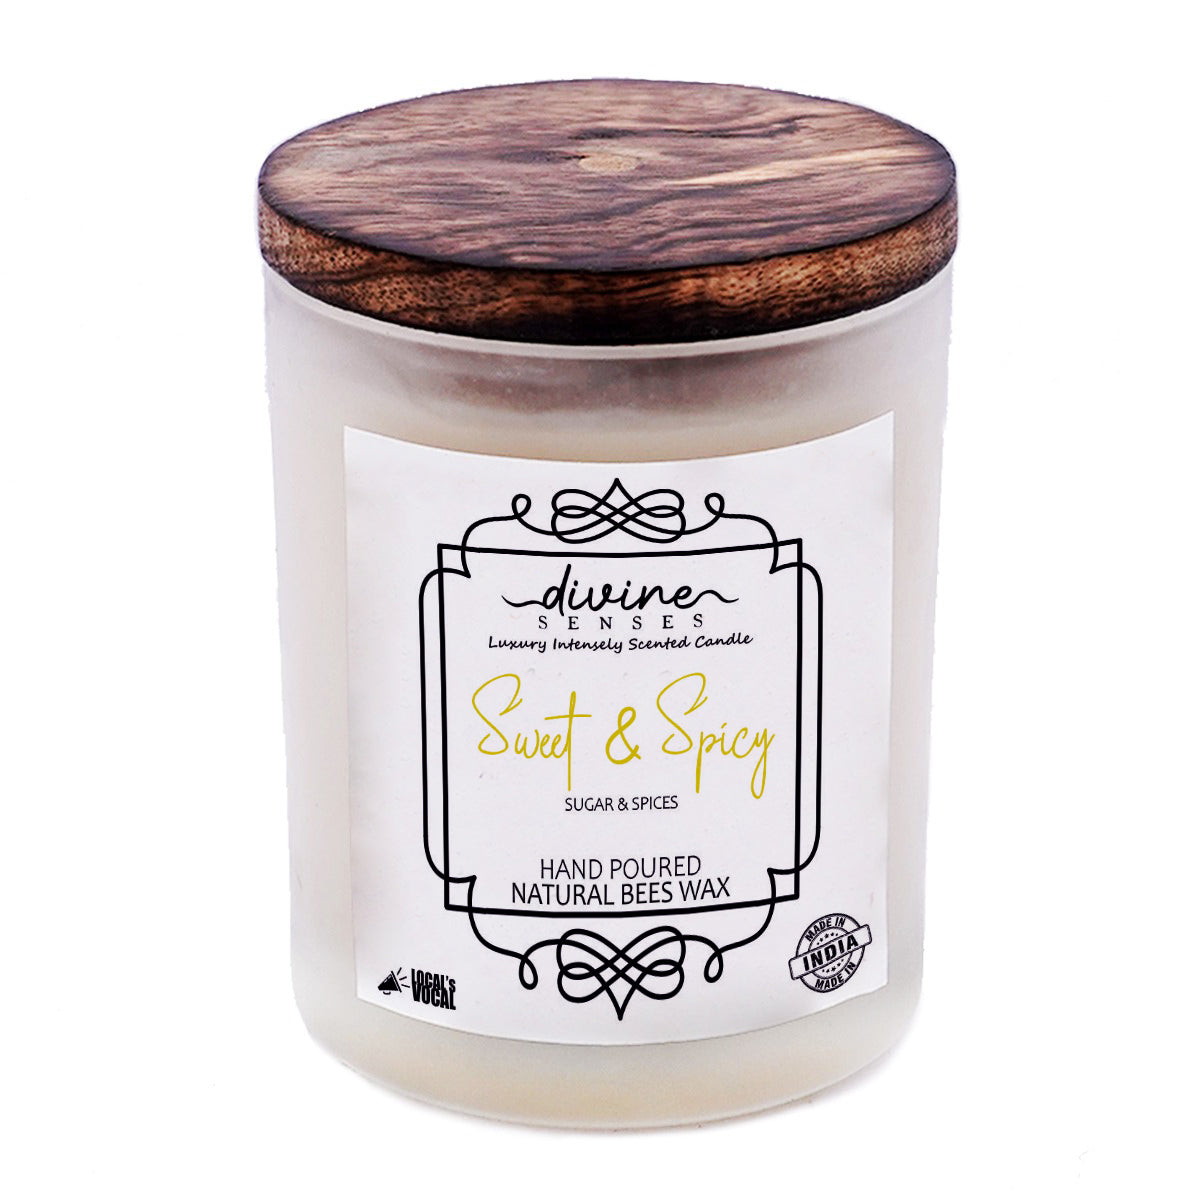 Sugar & spice intensely scented Natural Beeswax Candle